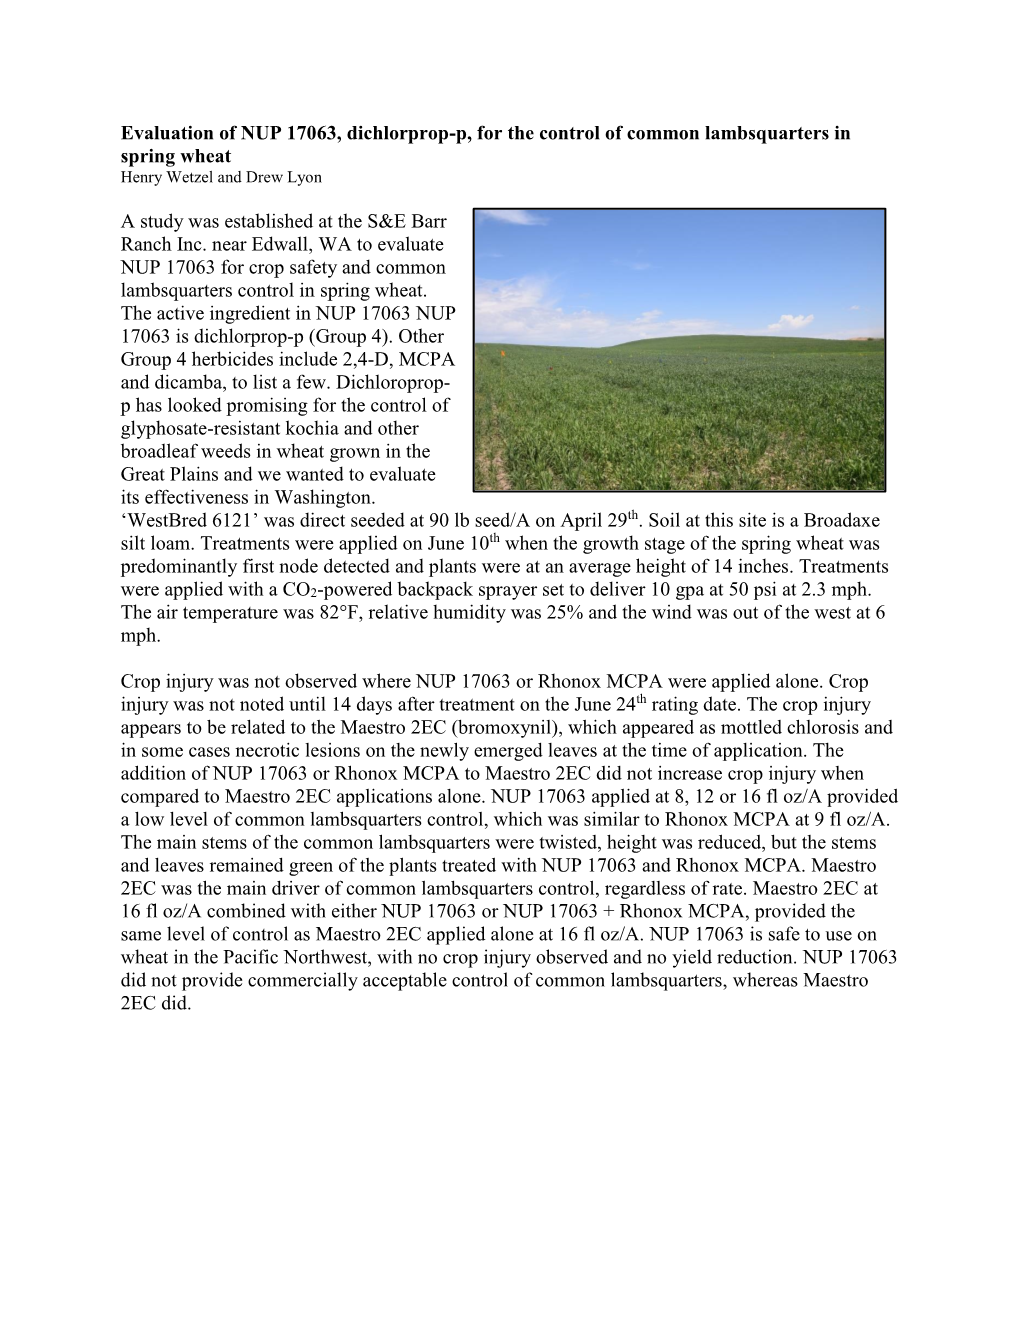 Evaluation of NUP 17063, Dichlorprop-P, for the Control of Common Lambsquarters in Spring Wheat a Study Was Established at the S